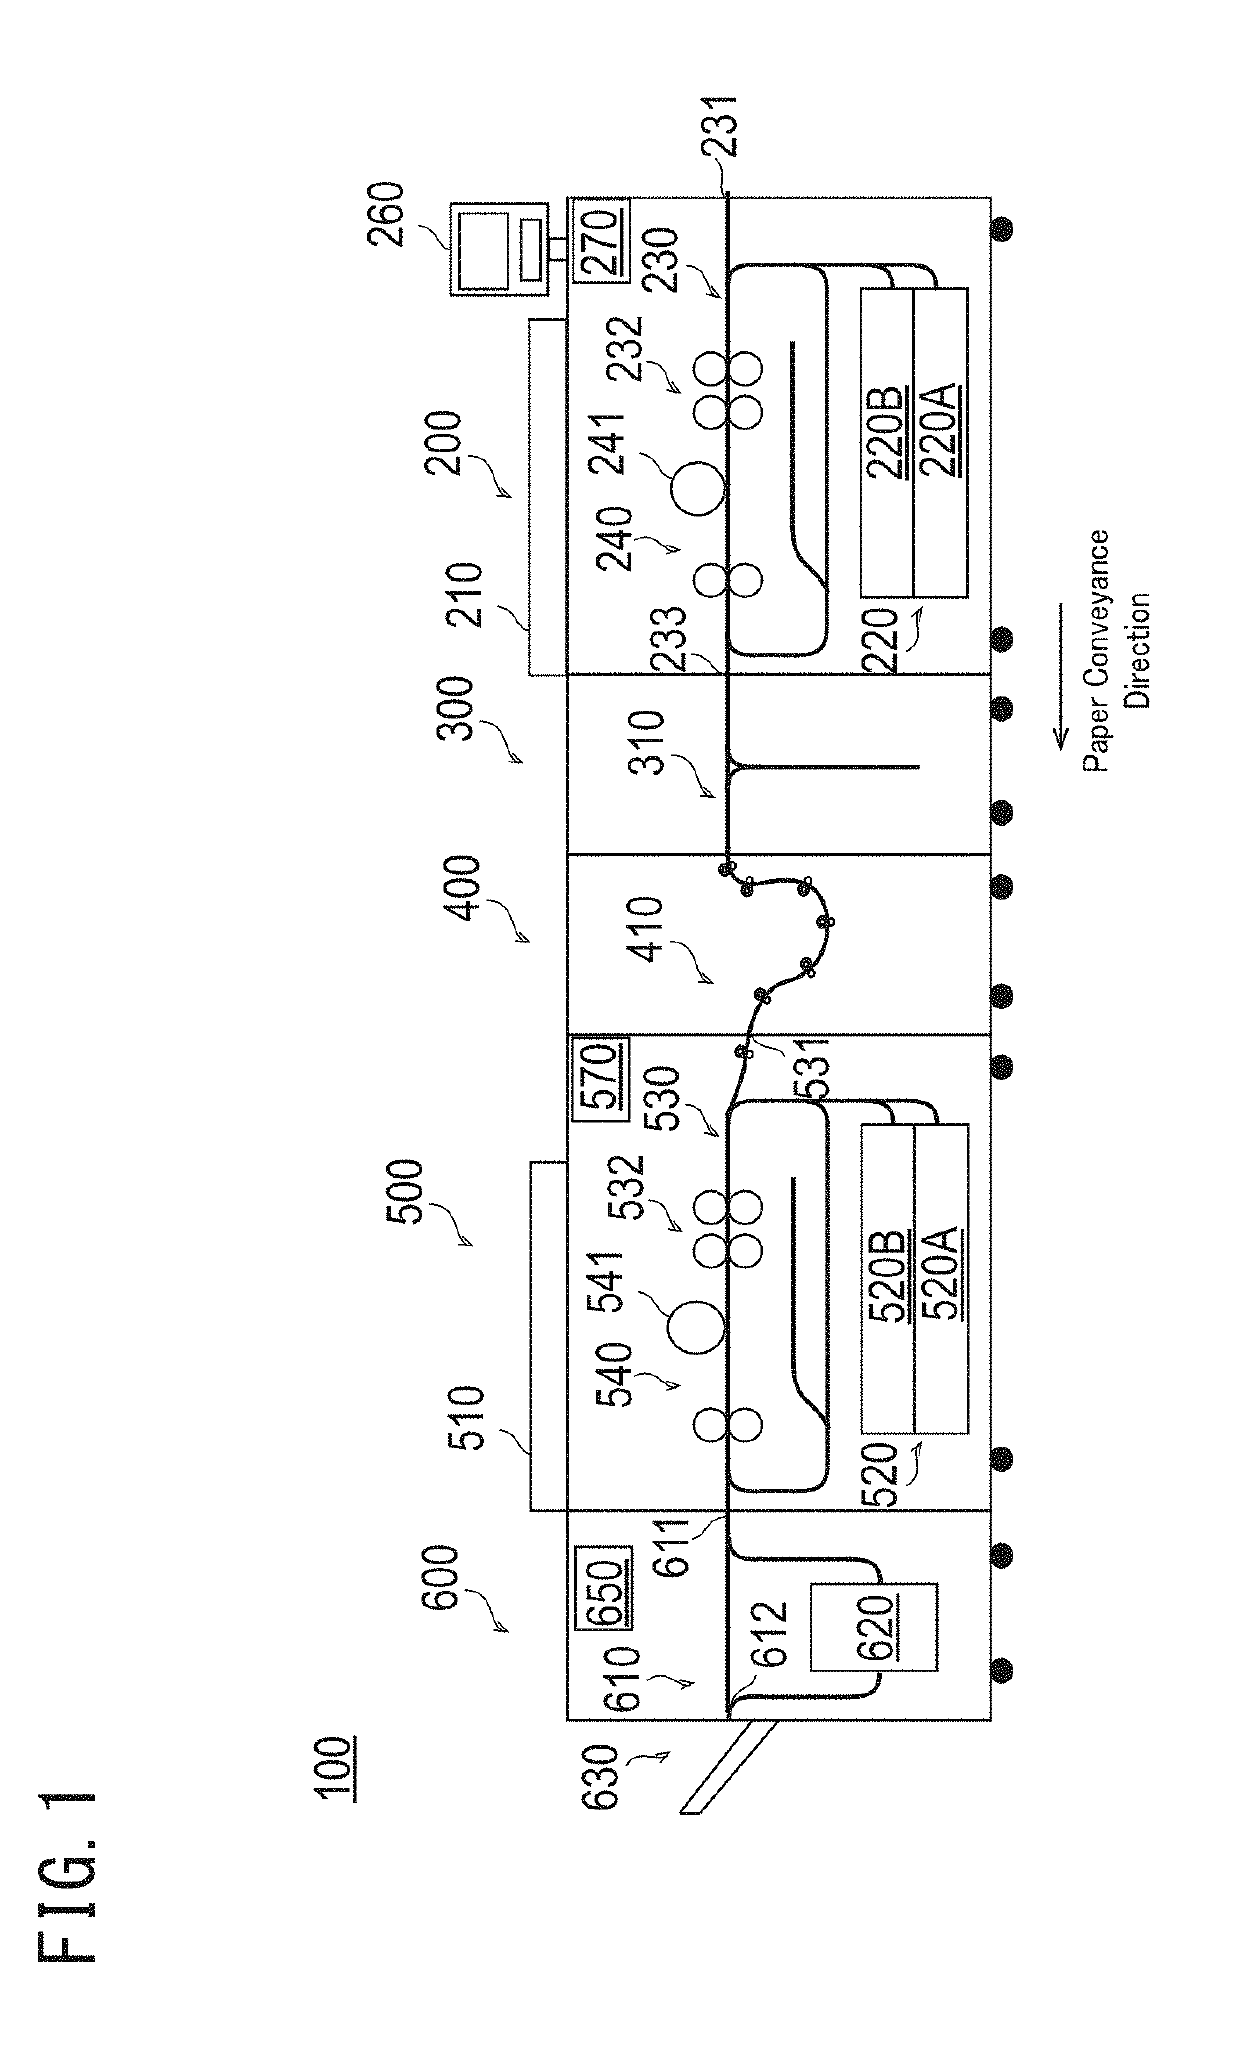 Image forming system